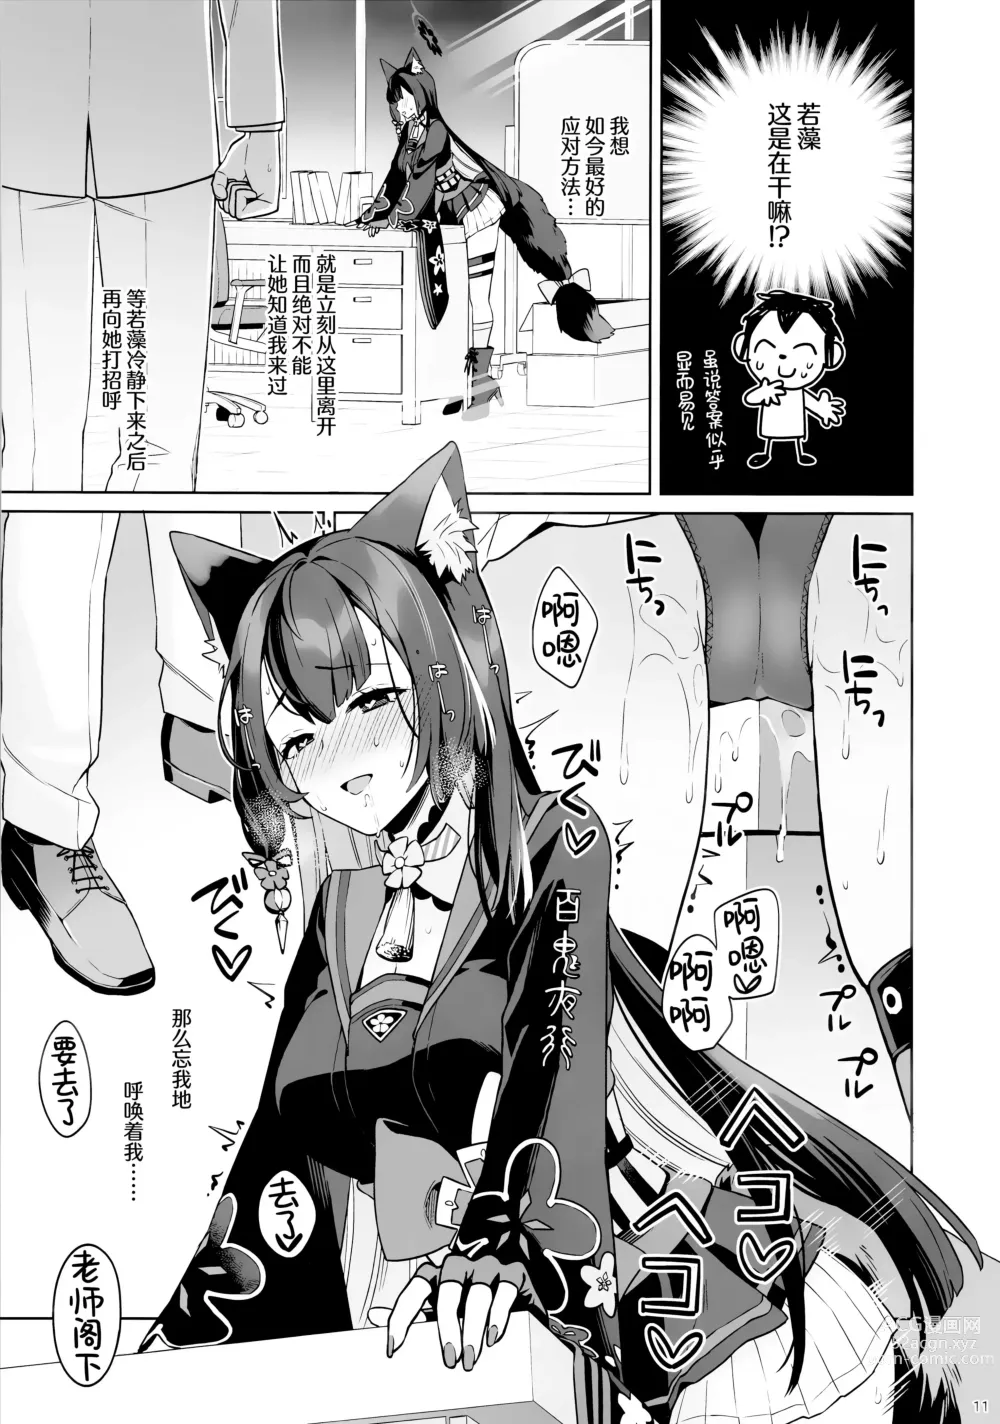 Page 10 of doujinshi 纯情·恋情·发情狐